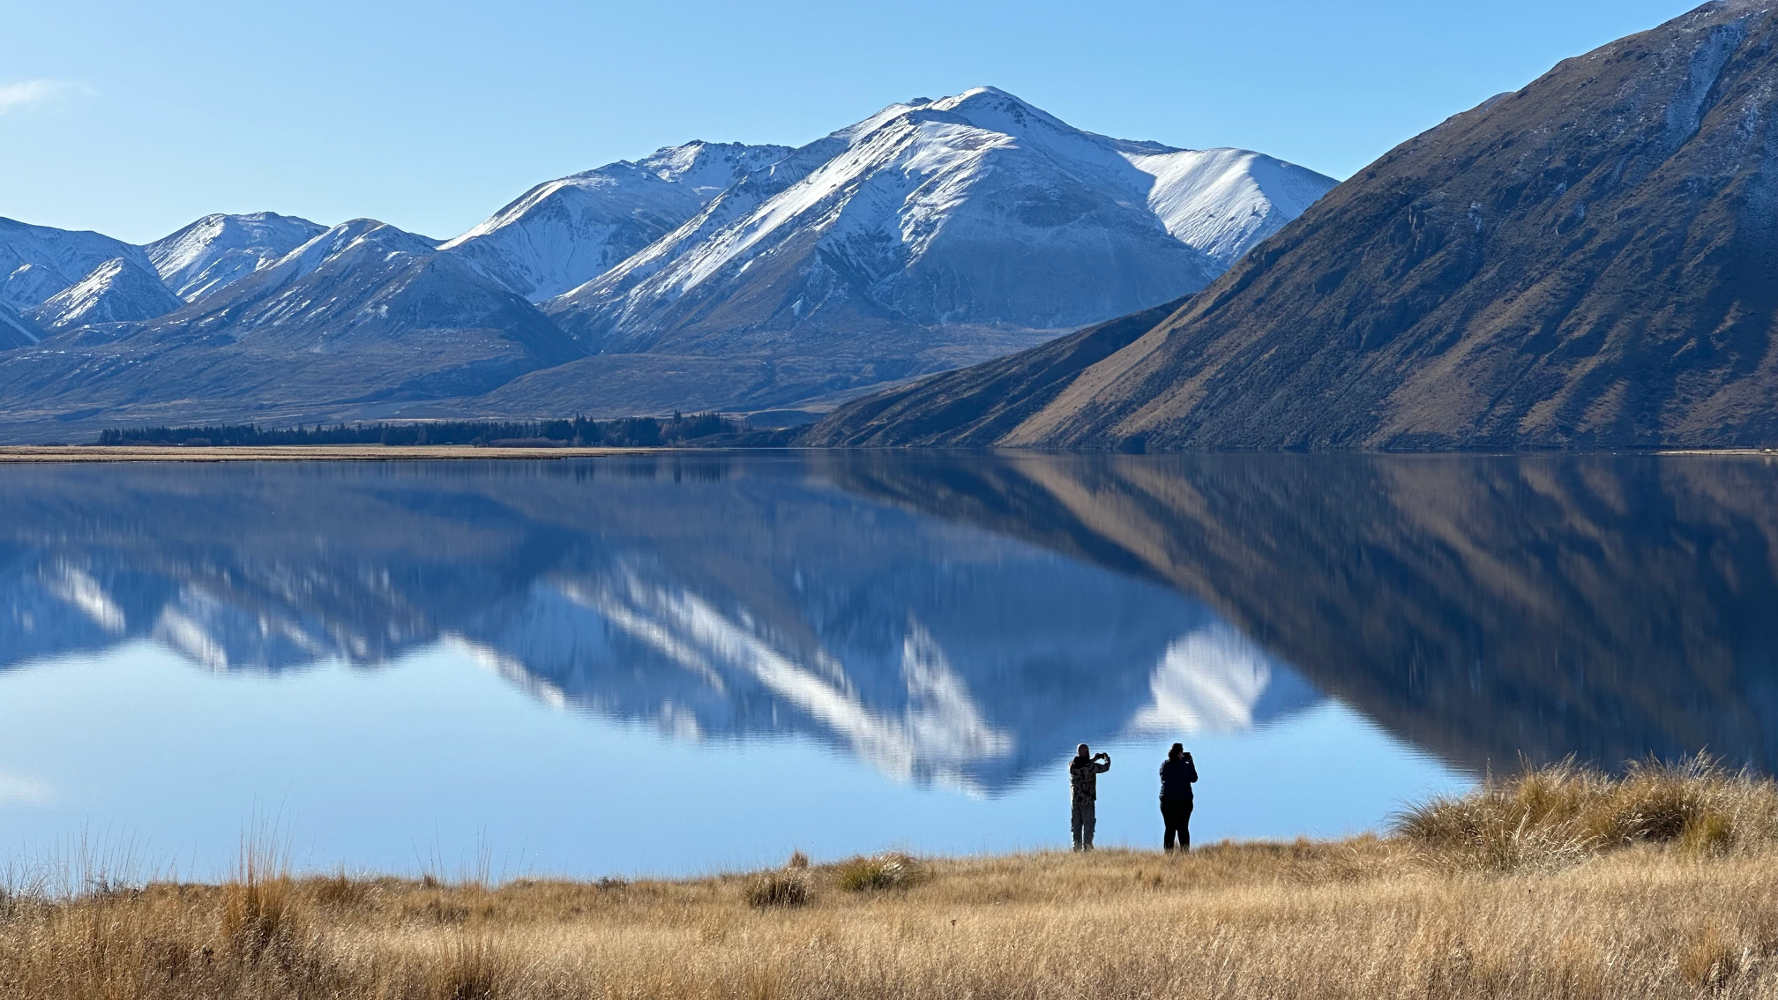 #Where to go wildlife spotting #Best places to visit in <br>#Marlborough #Nelson #West Coast #Canterbury #Otago #Southland #Stewart Island <br>#Best time to visit South Island must see attractions <br>#Things to see in the South Island #Scenic hotspots 